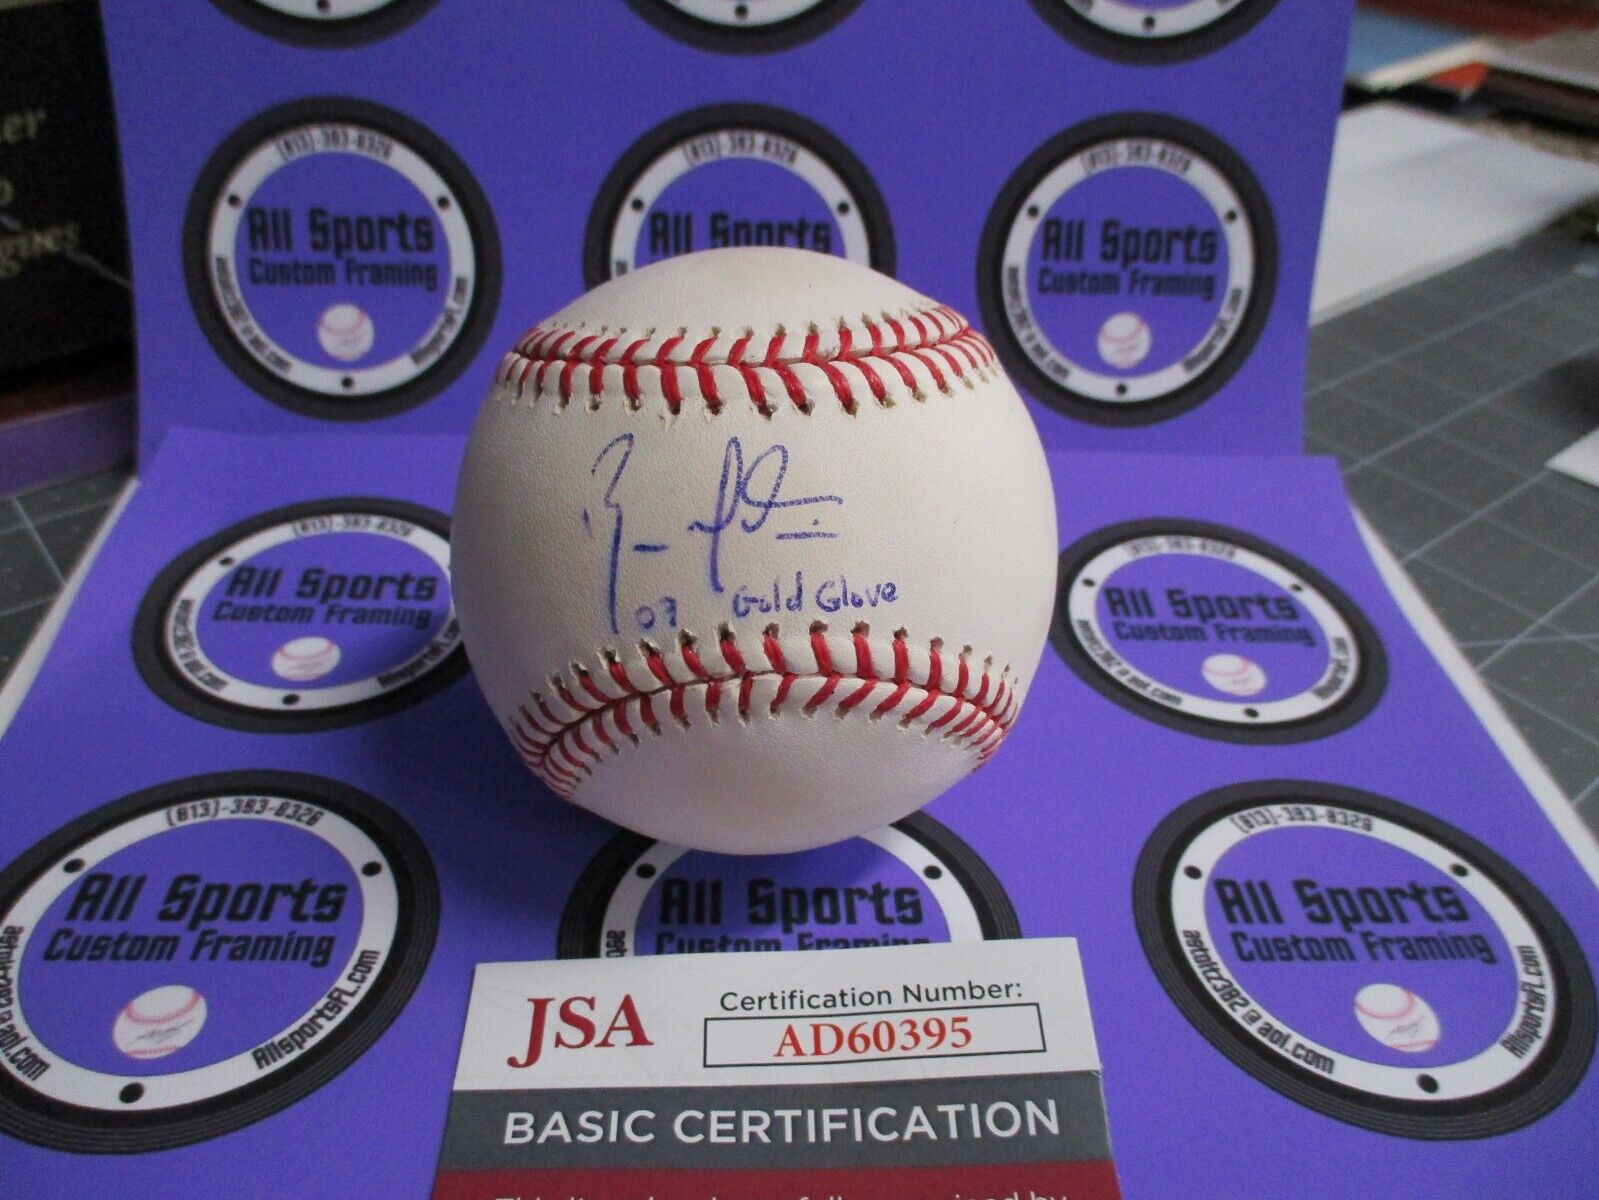 Russell Martin Autographed Baseball Authenticated by JSA #AD60395 07 Gold Glove